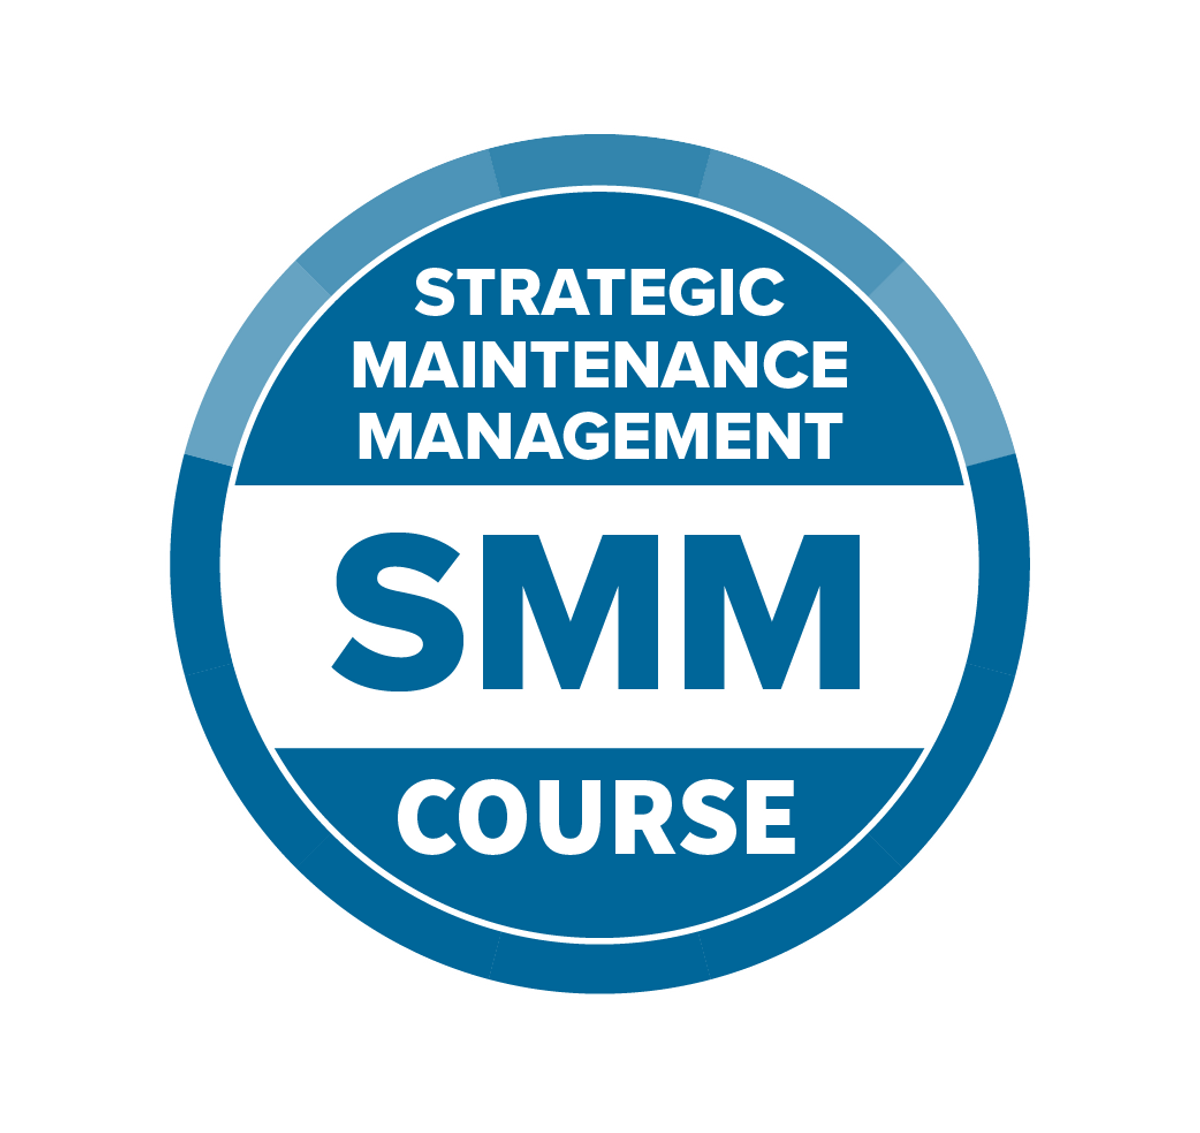 Strategic Maintenance Management Course (formerly CMM) Co-located at International Maintenance Conference